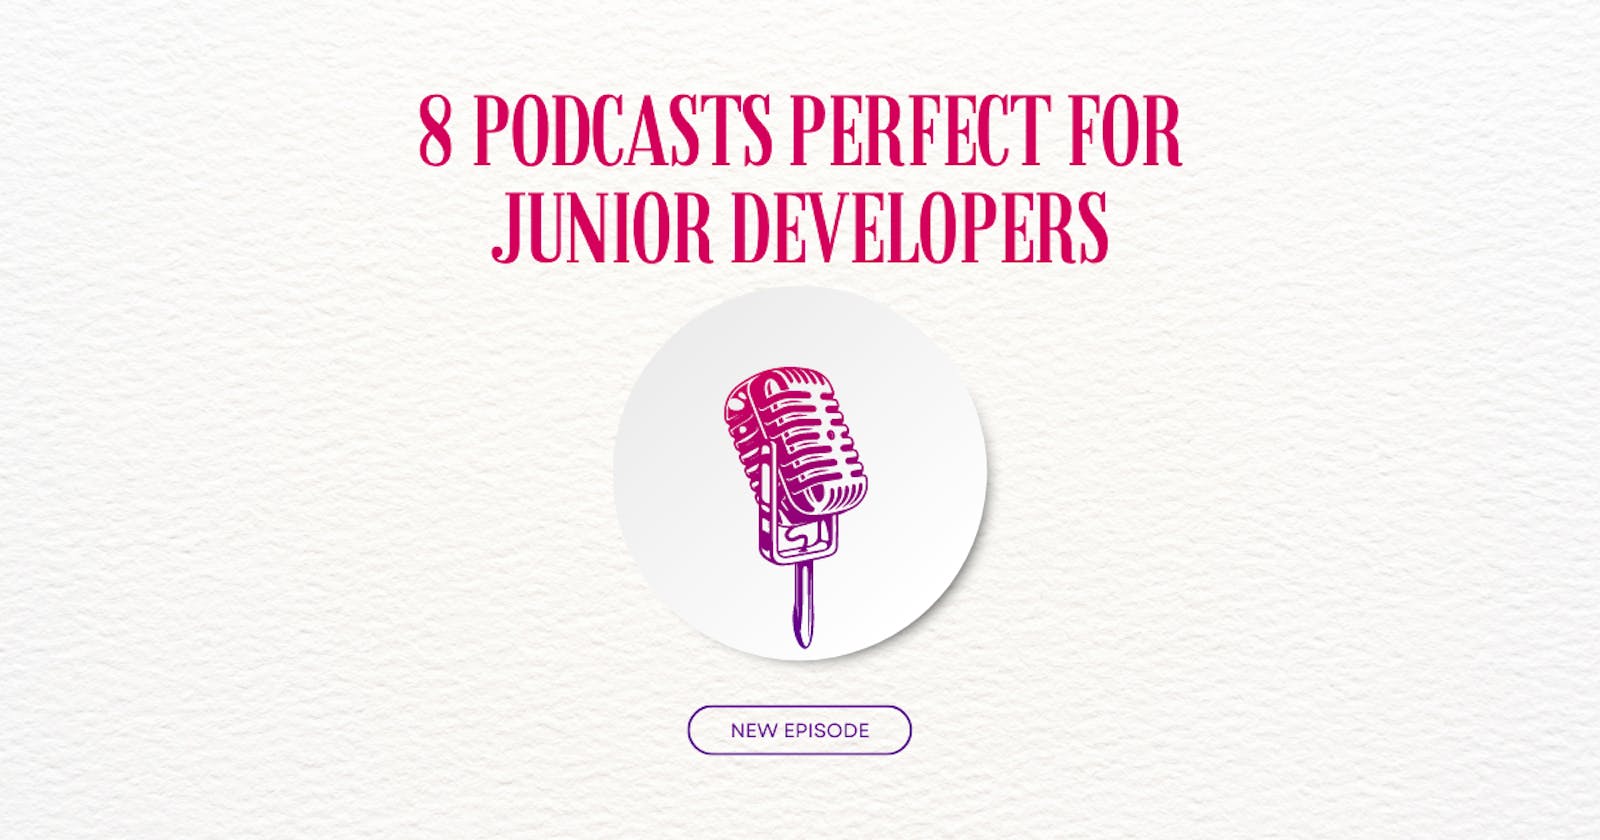 8 Podcasts Perfect for Junior Developers 🎧